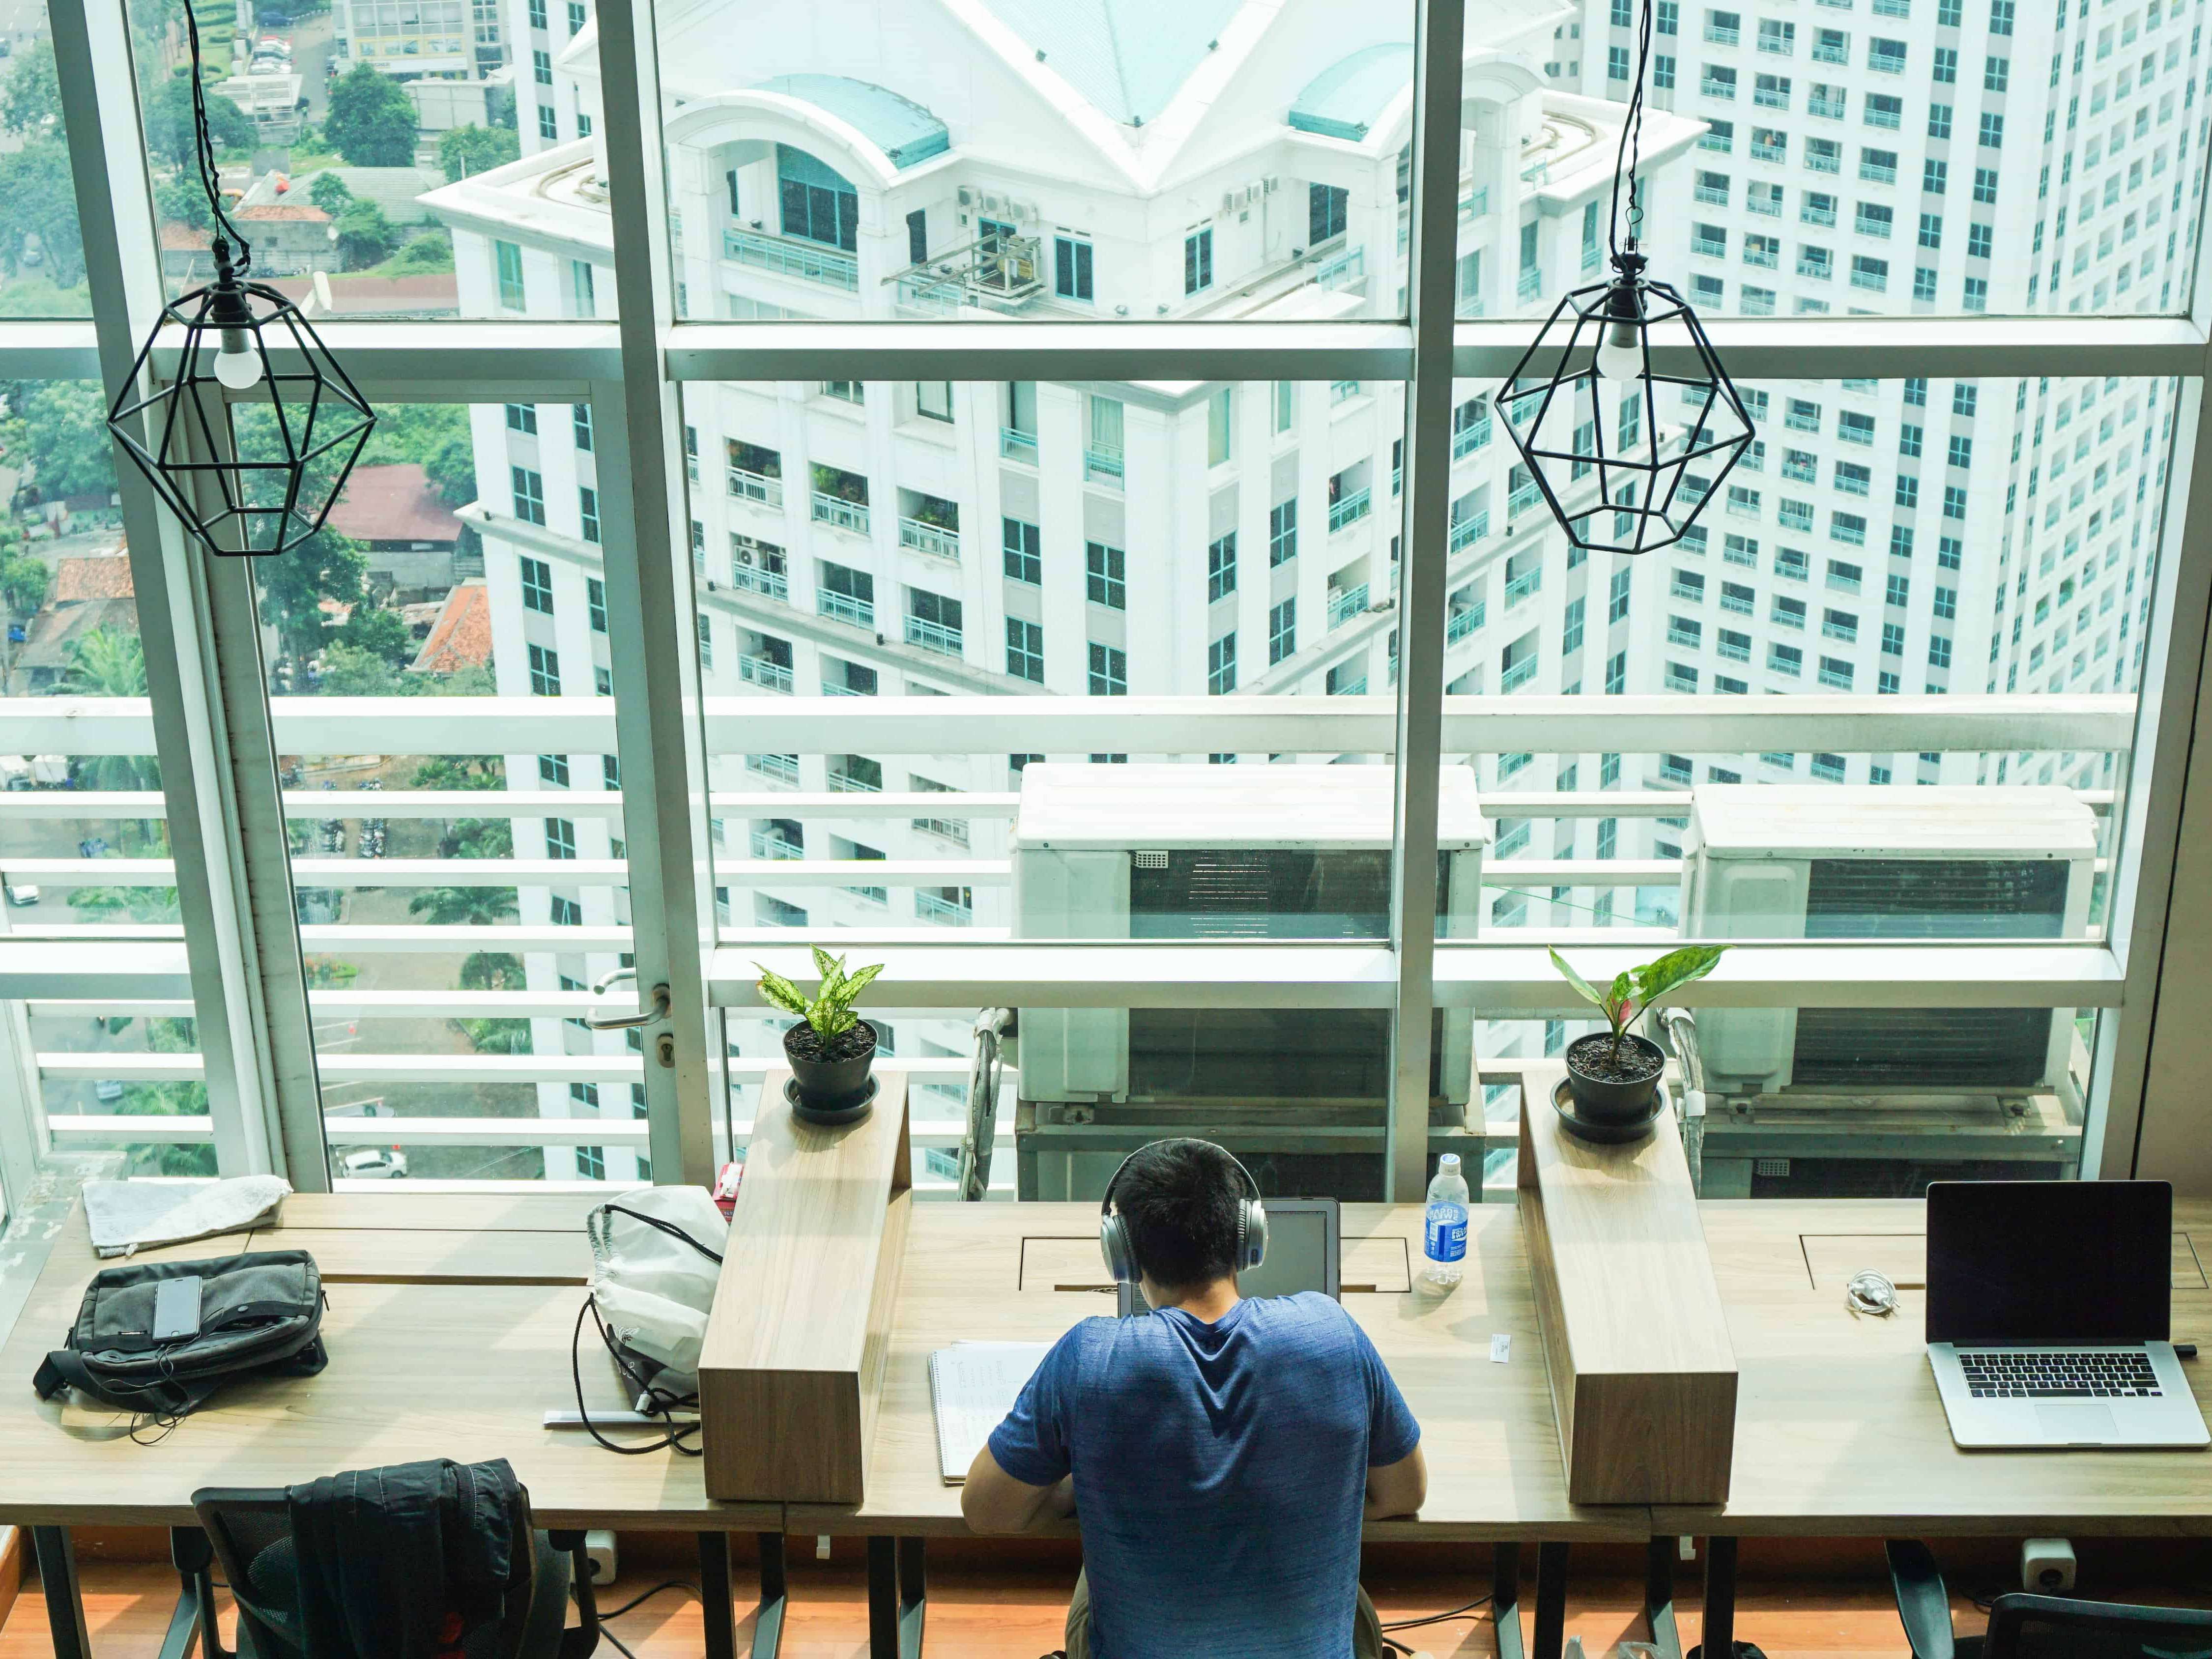 Man doing work on computer at wooden desk in front of glass windows overlooking cityscape